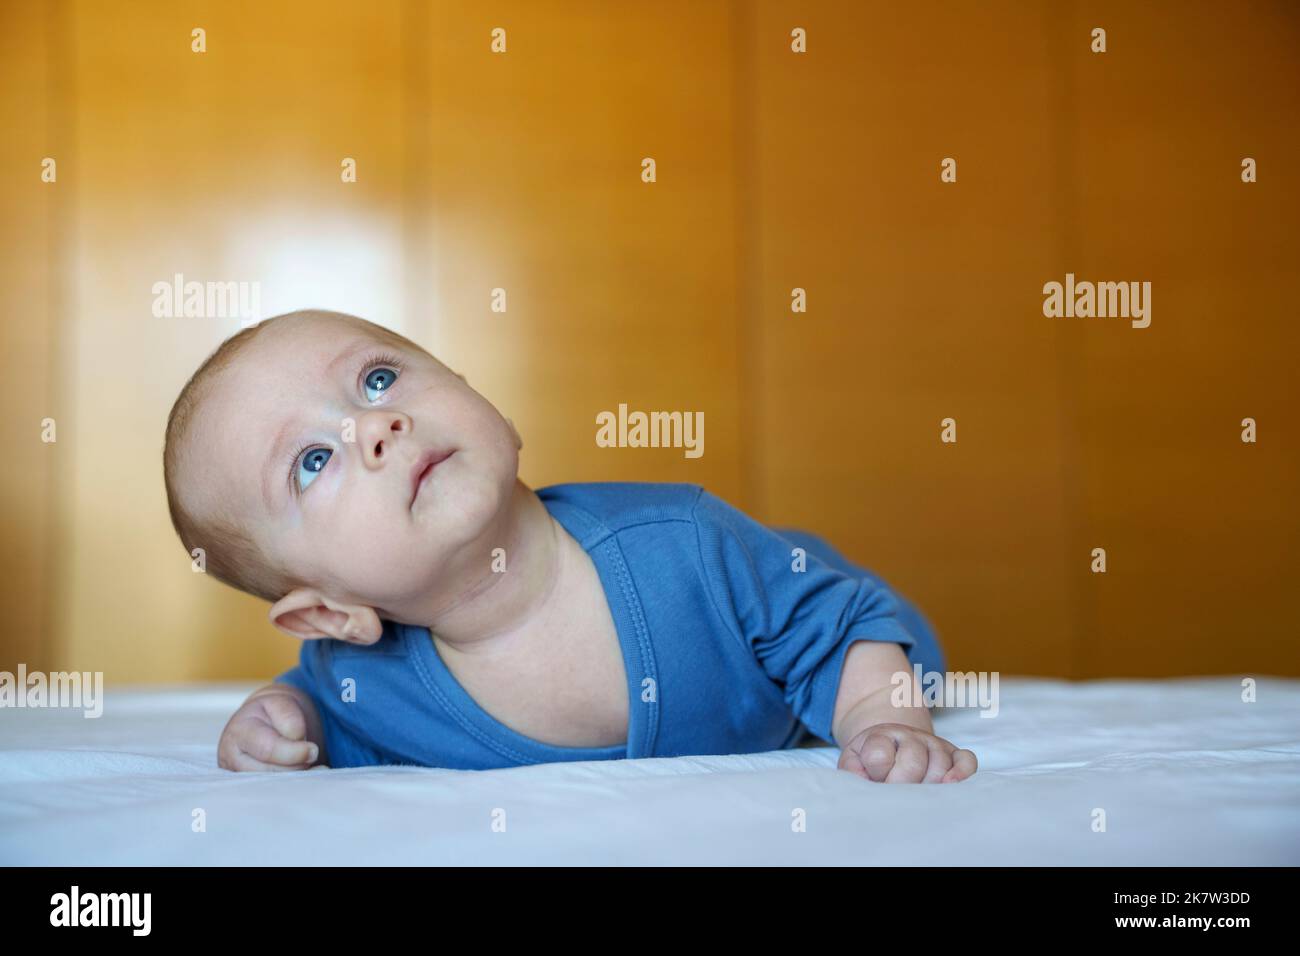 4 months old baby with blue eyes looking up Stock Photo